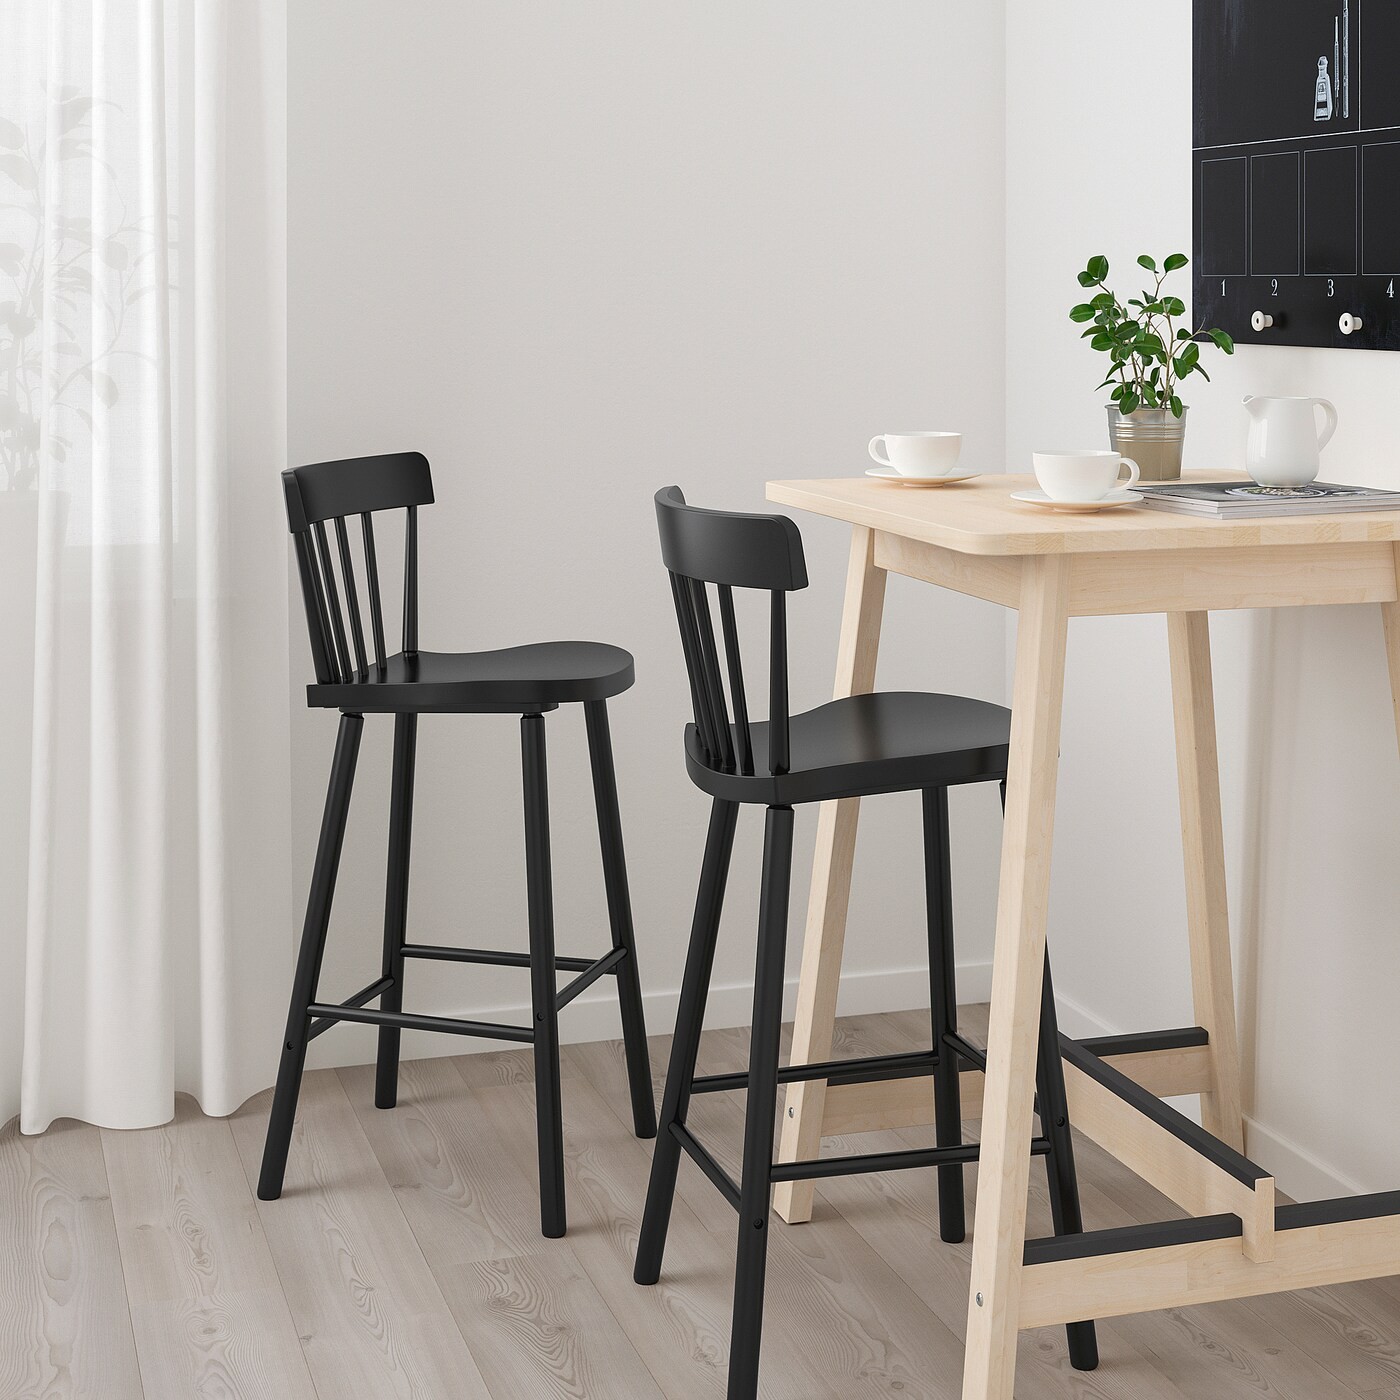 NORRÅKER / NORRARYD Bar table and 2 bar stools